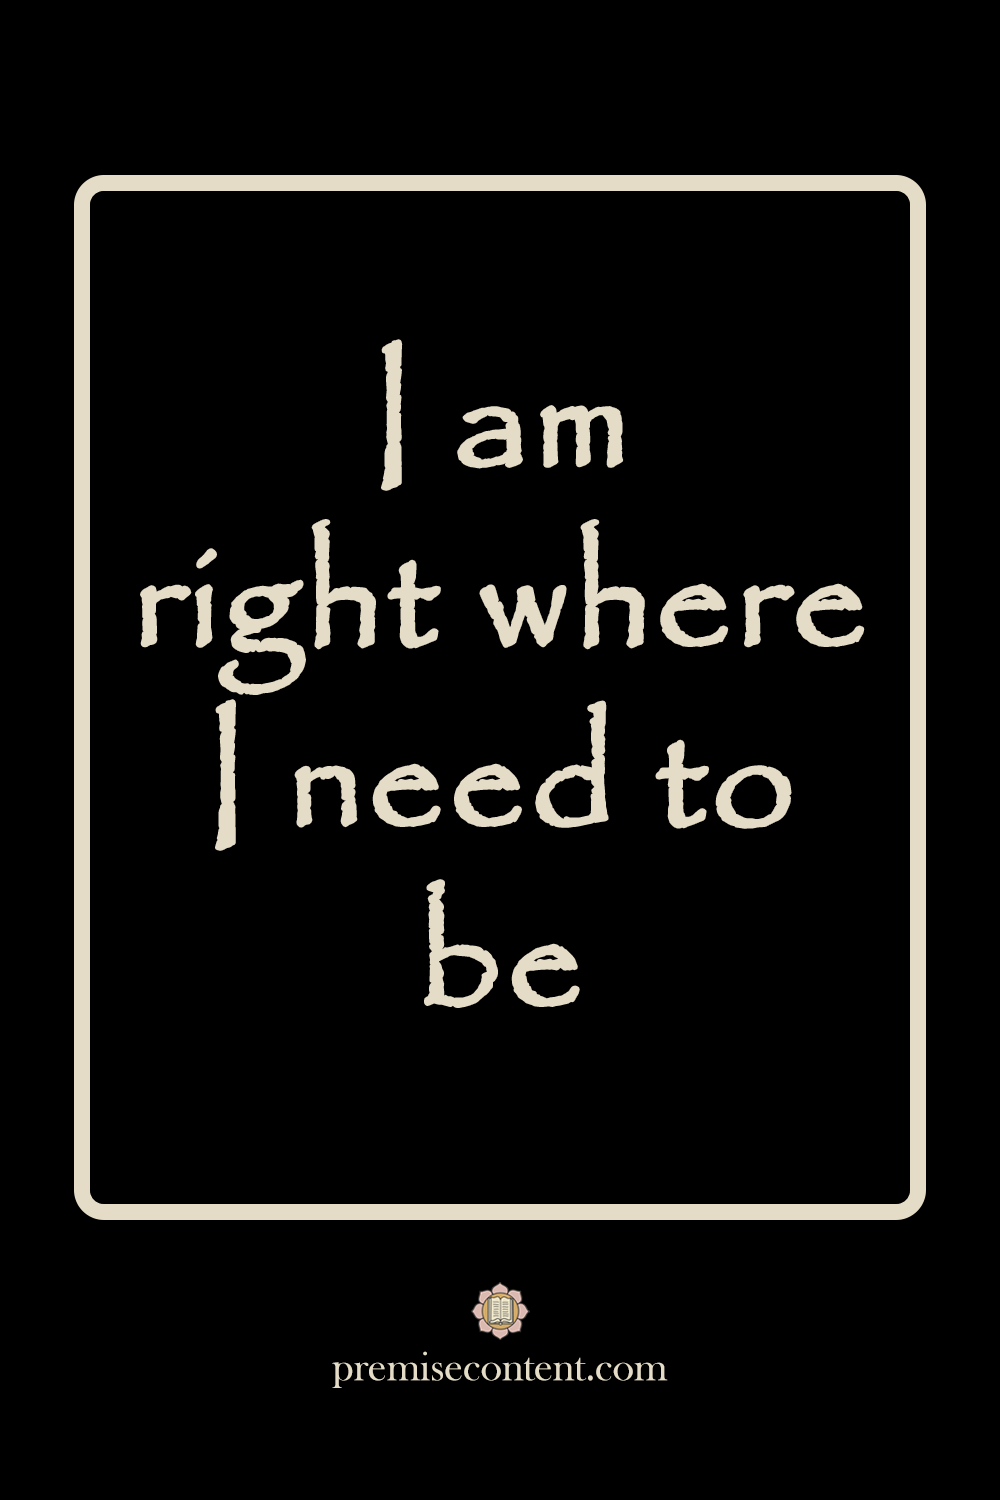 I am right where I need to be - Positive Affirmation